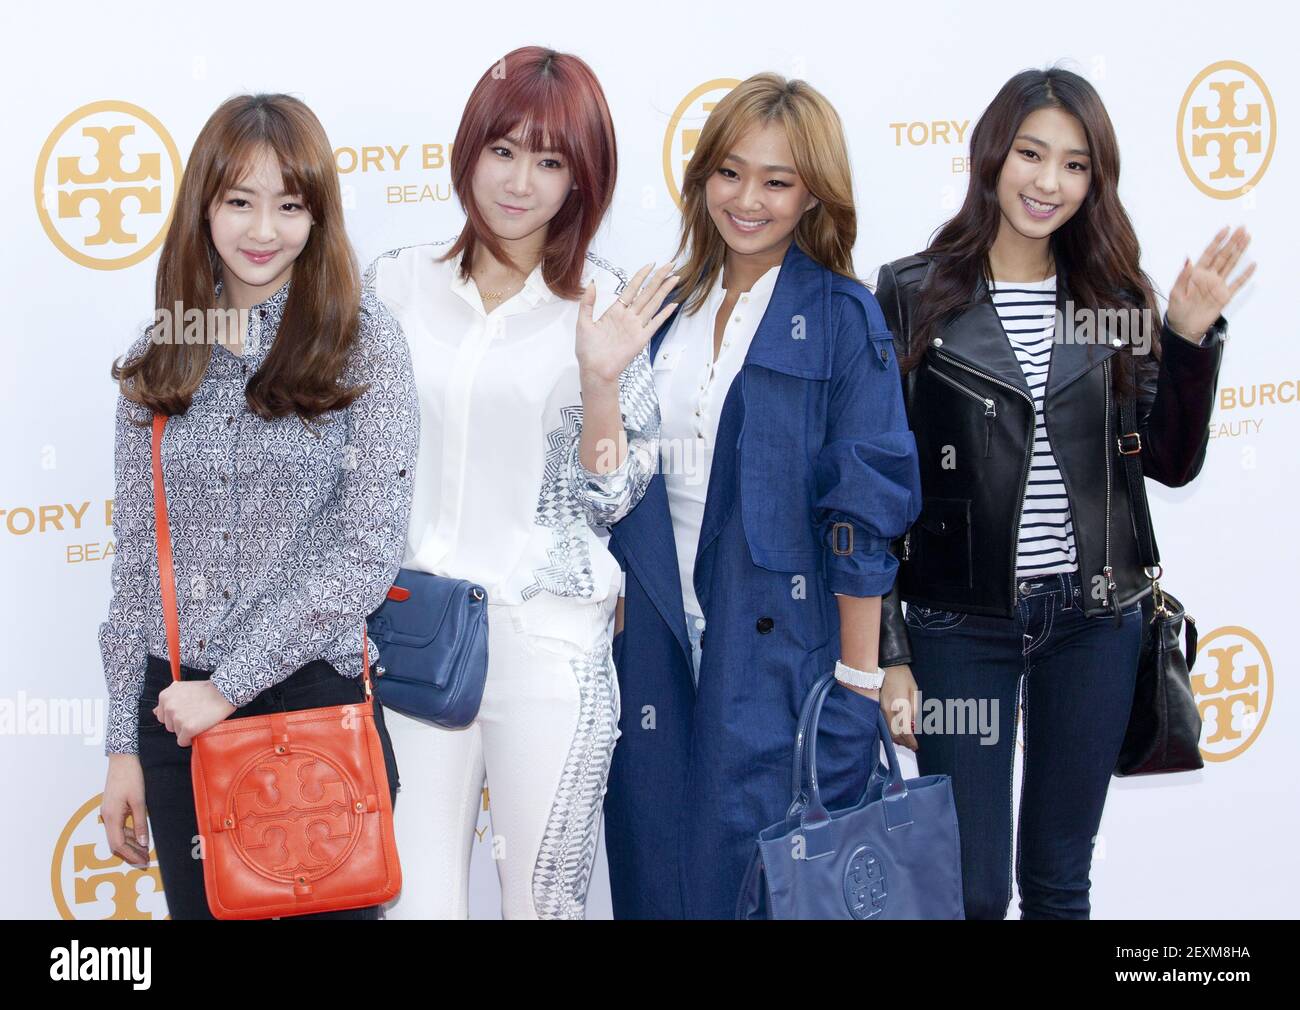 26 February 2014 - Seoul, South Korea : South Korean K-Pop girl group  Sistar, attend a photo call for the . fashion brand Tory Burch perfume  launching event at Tory Burch Plagship